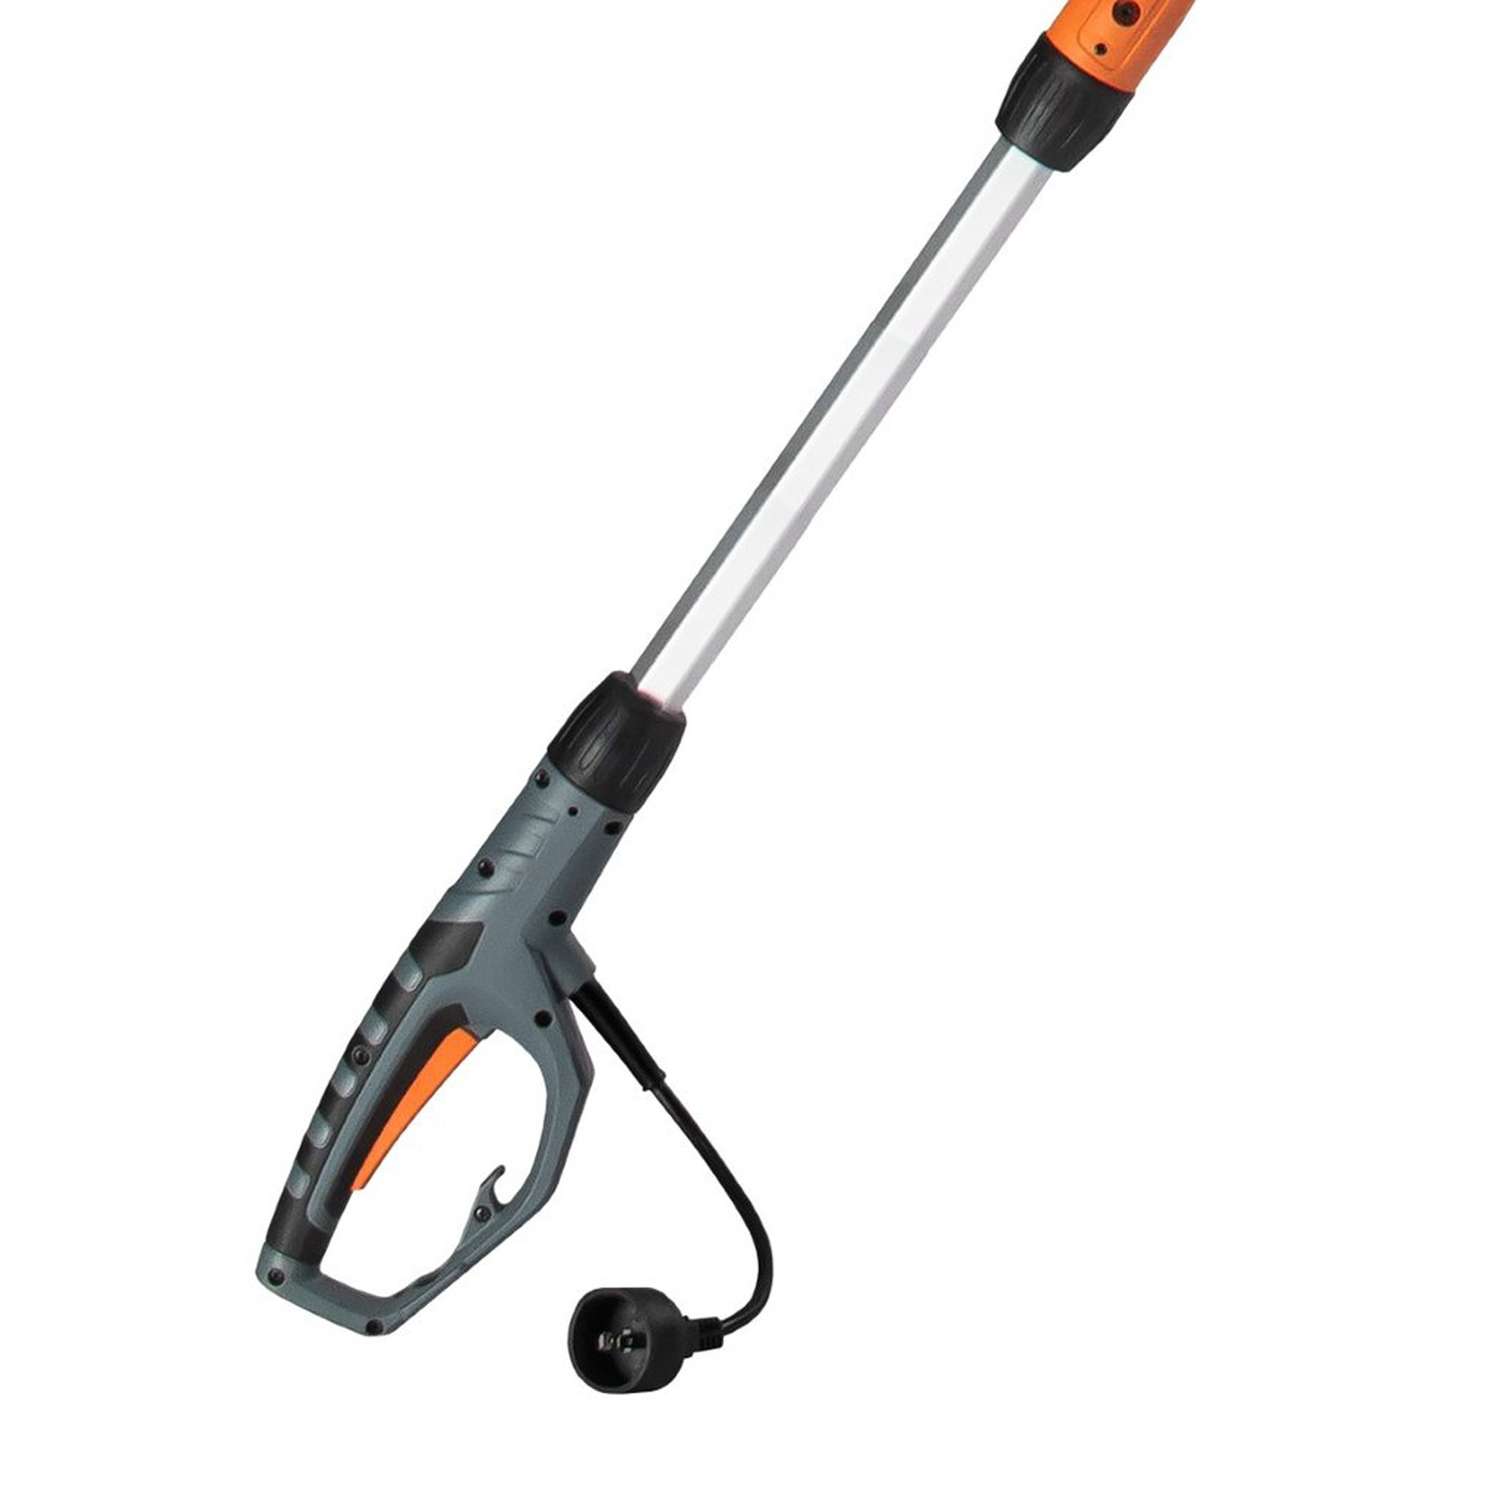 Electric Black and Decker Pole saw - farm & garden - by owner